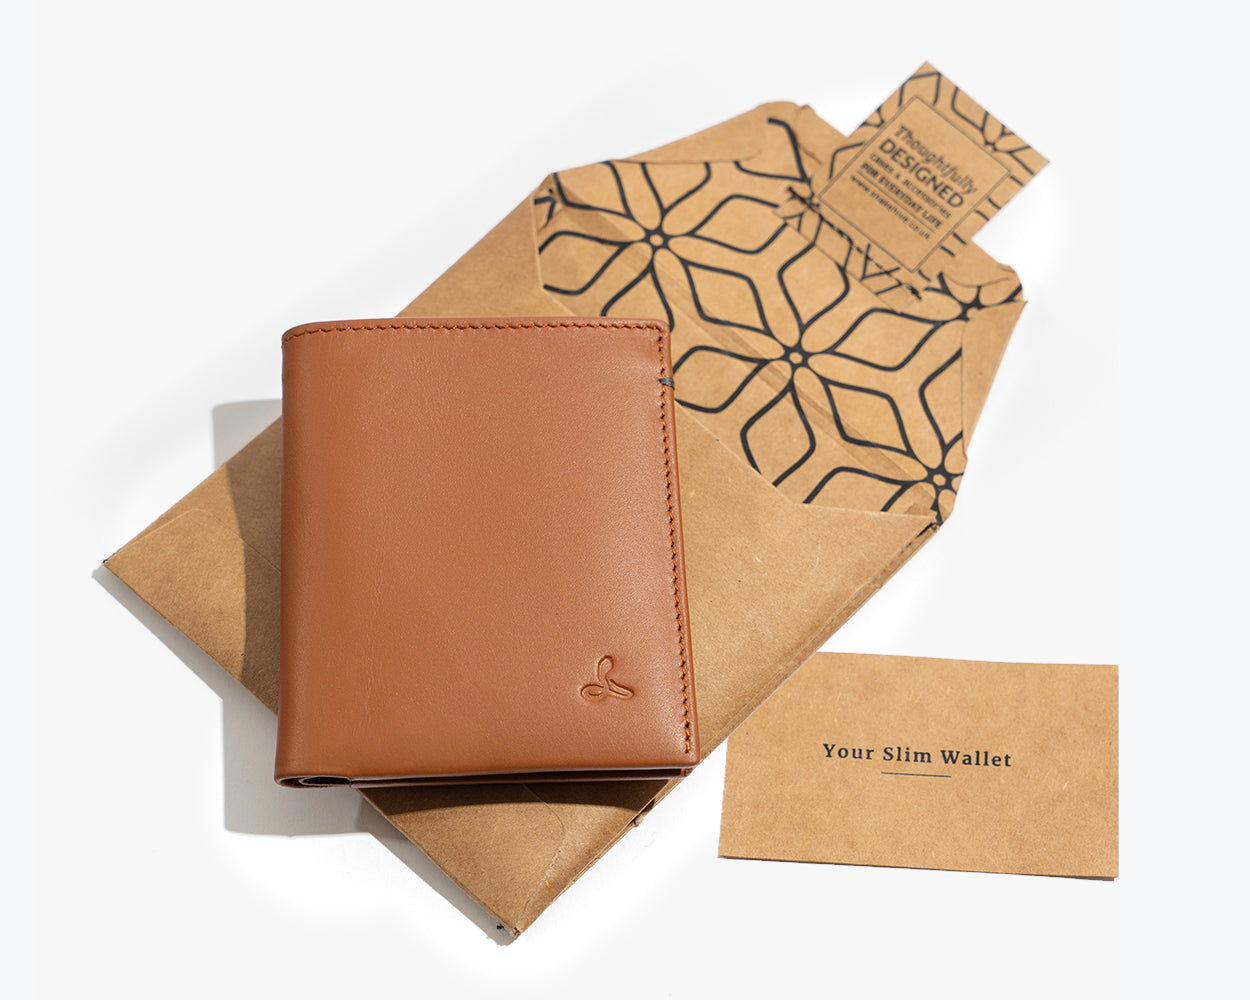 LEATHER BIFOLD WALLET - THE ESSENTIAL COLLECTION